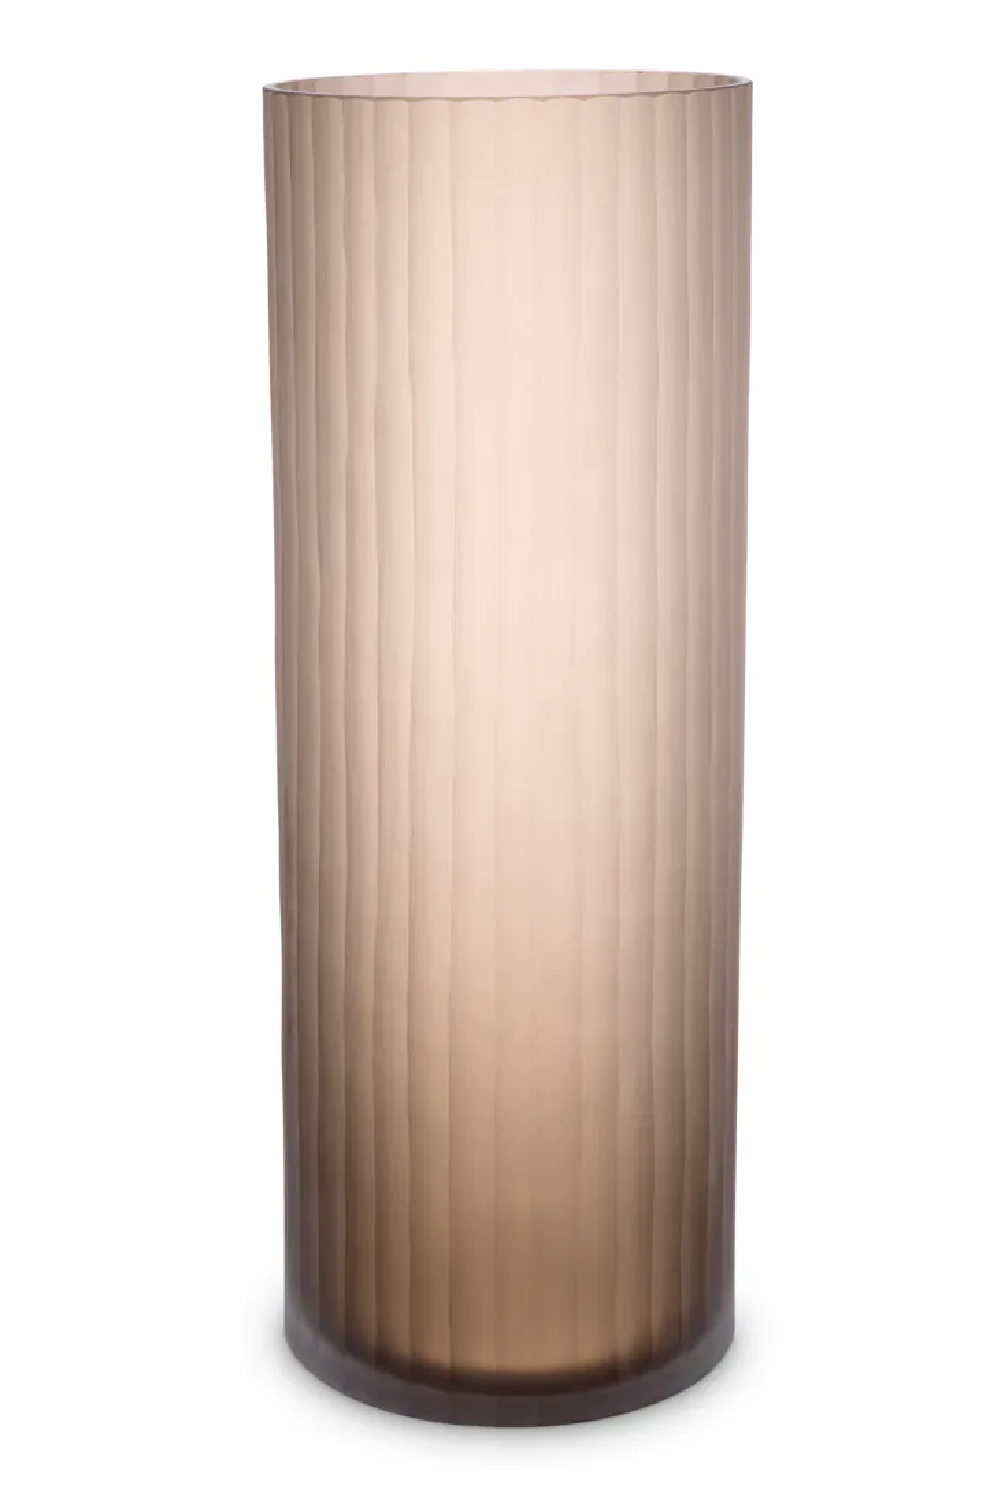 Brown Frosted Glass Vase | Eichholtz Haight | Oroa.com